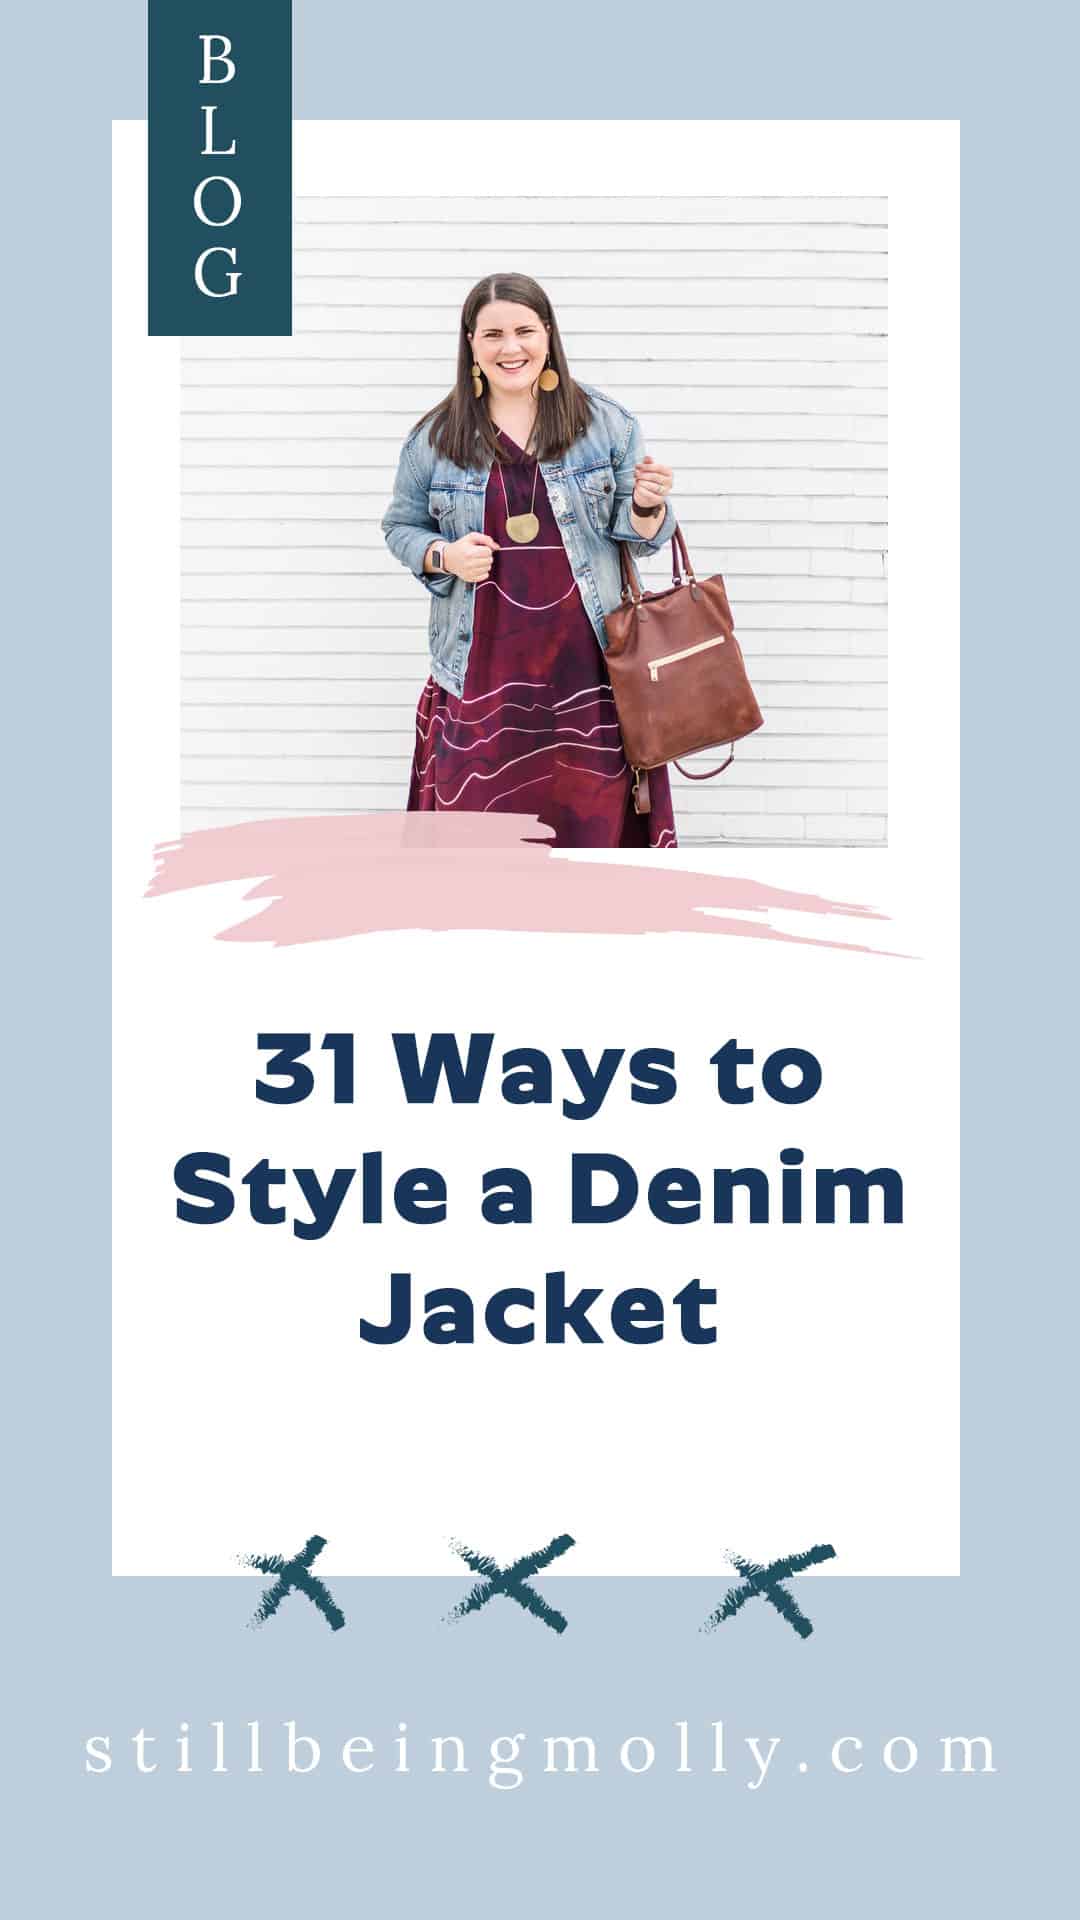 31 Ways to Style a Denim Jacket | Still Being Molly